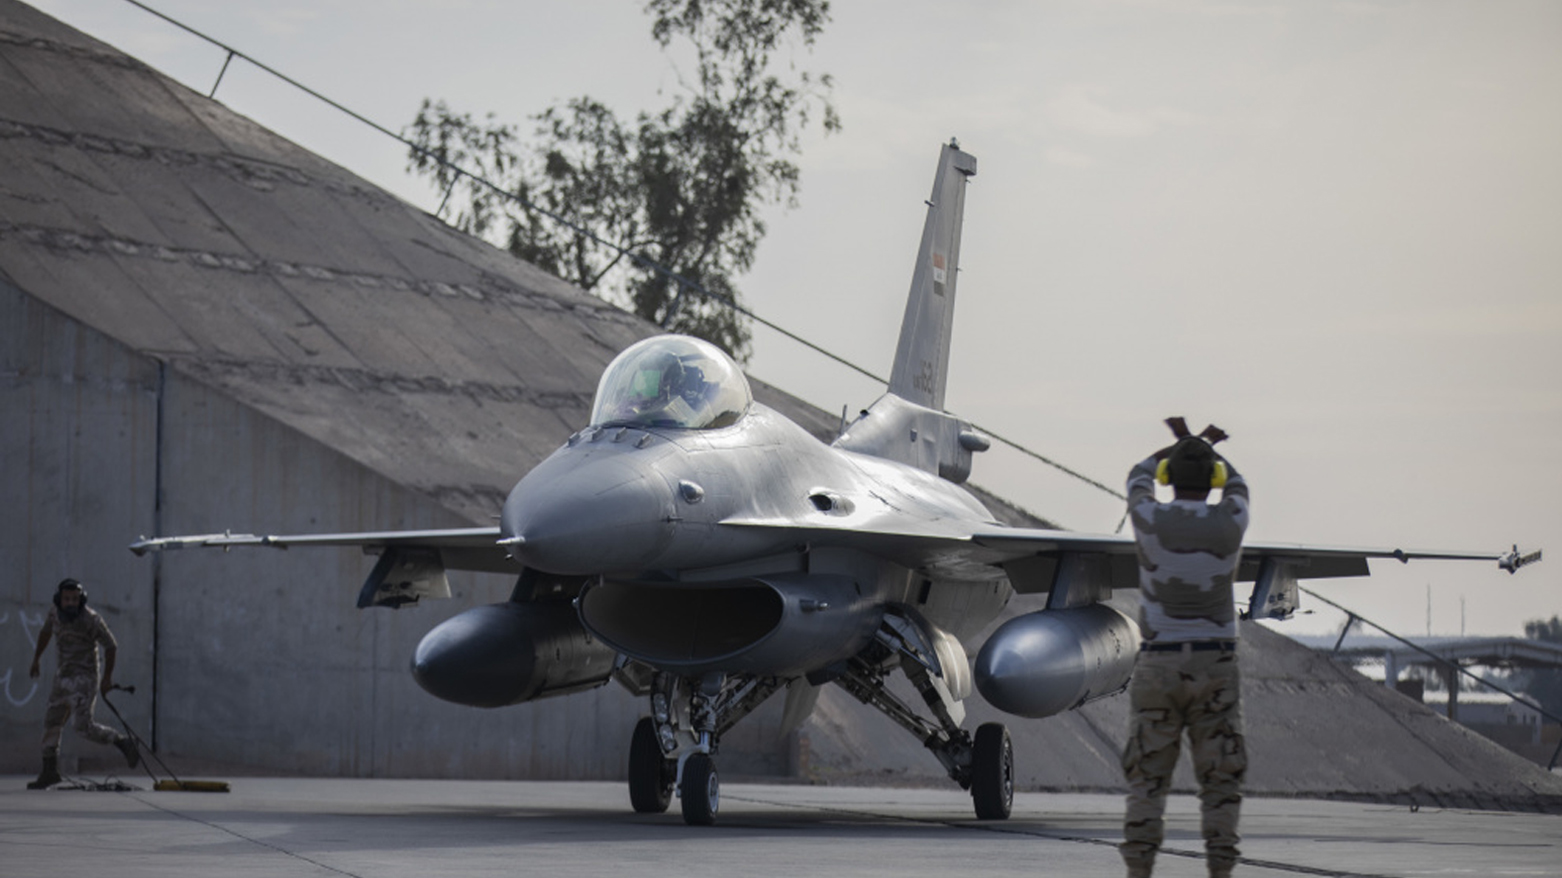 An Iraqi Air Force F-16 crew chief performs preflight checks on the aircraft before departure at Balad Air Base, Iraq, Dec. 14, 2020. (Photo: Spc. Jorge Reyes/U.S. Army Reserve)